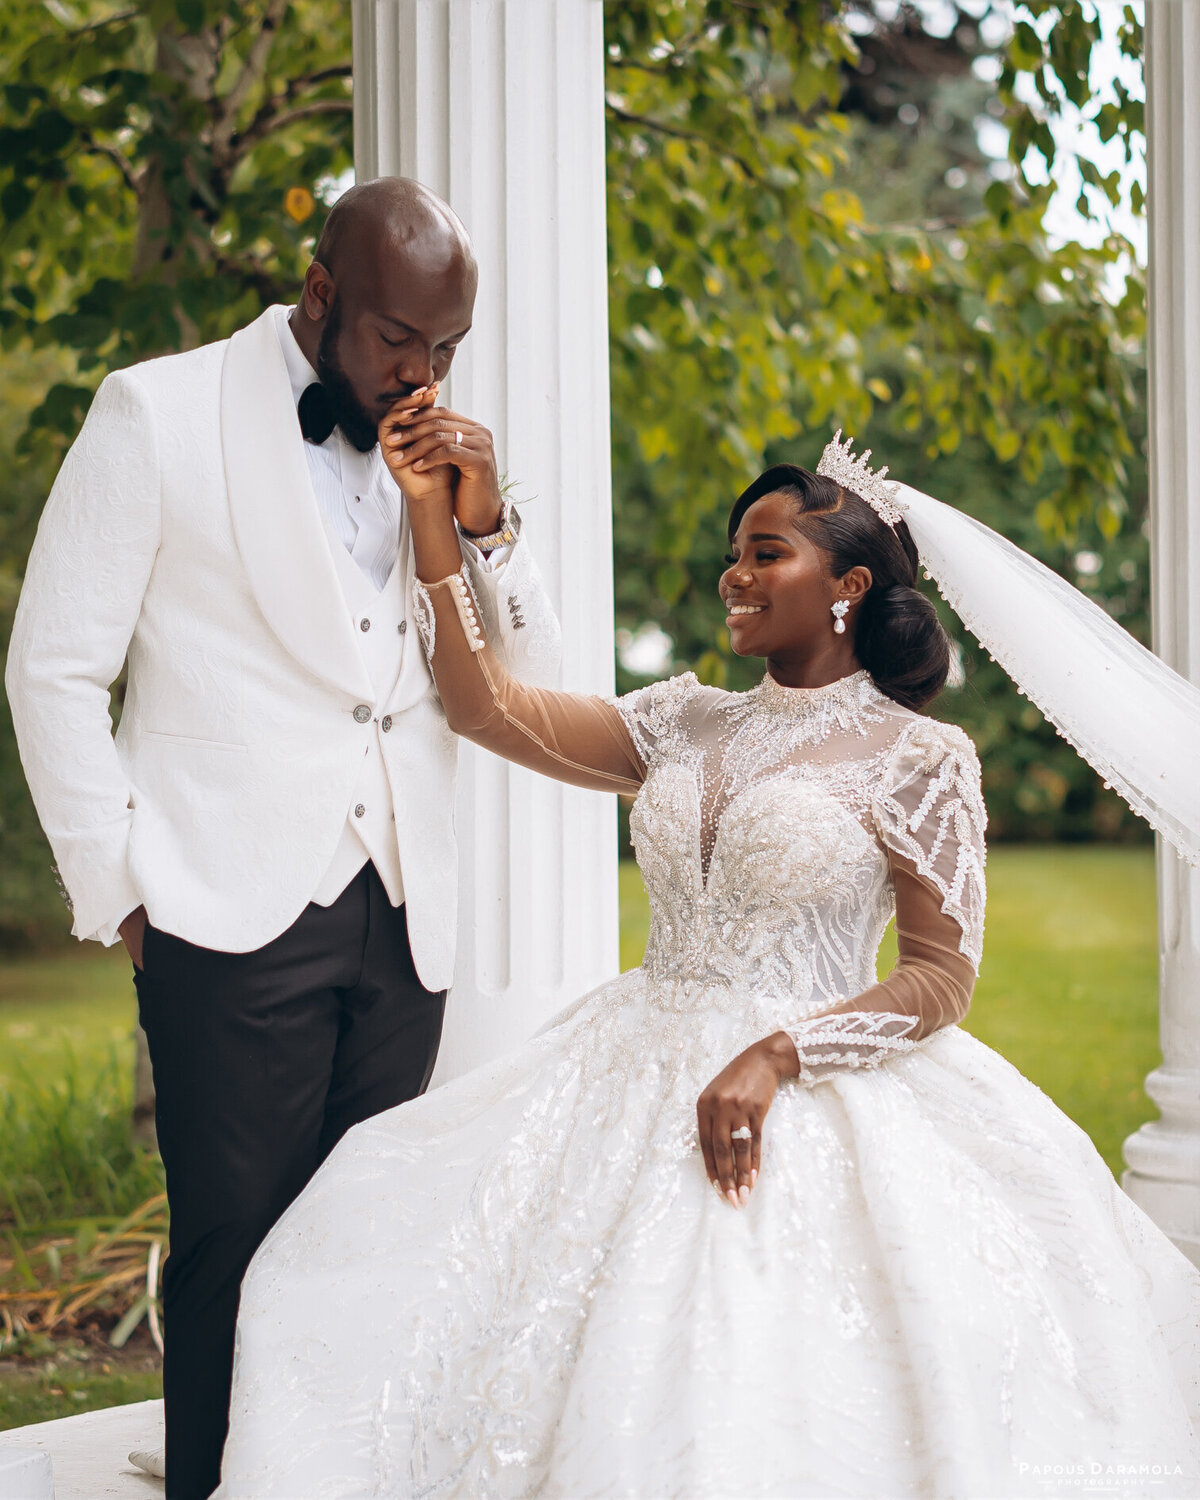 Abigail and Abije Oruka Events Papouse photographer Wedding event planners Toronto planner African Nigerian Eyitayo Dada Dara Ayoola outdoor ceremony floral princess ballgown rolls royce groom suit potraits  paradise banquet hall vaughn 190